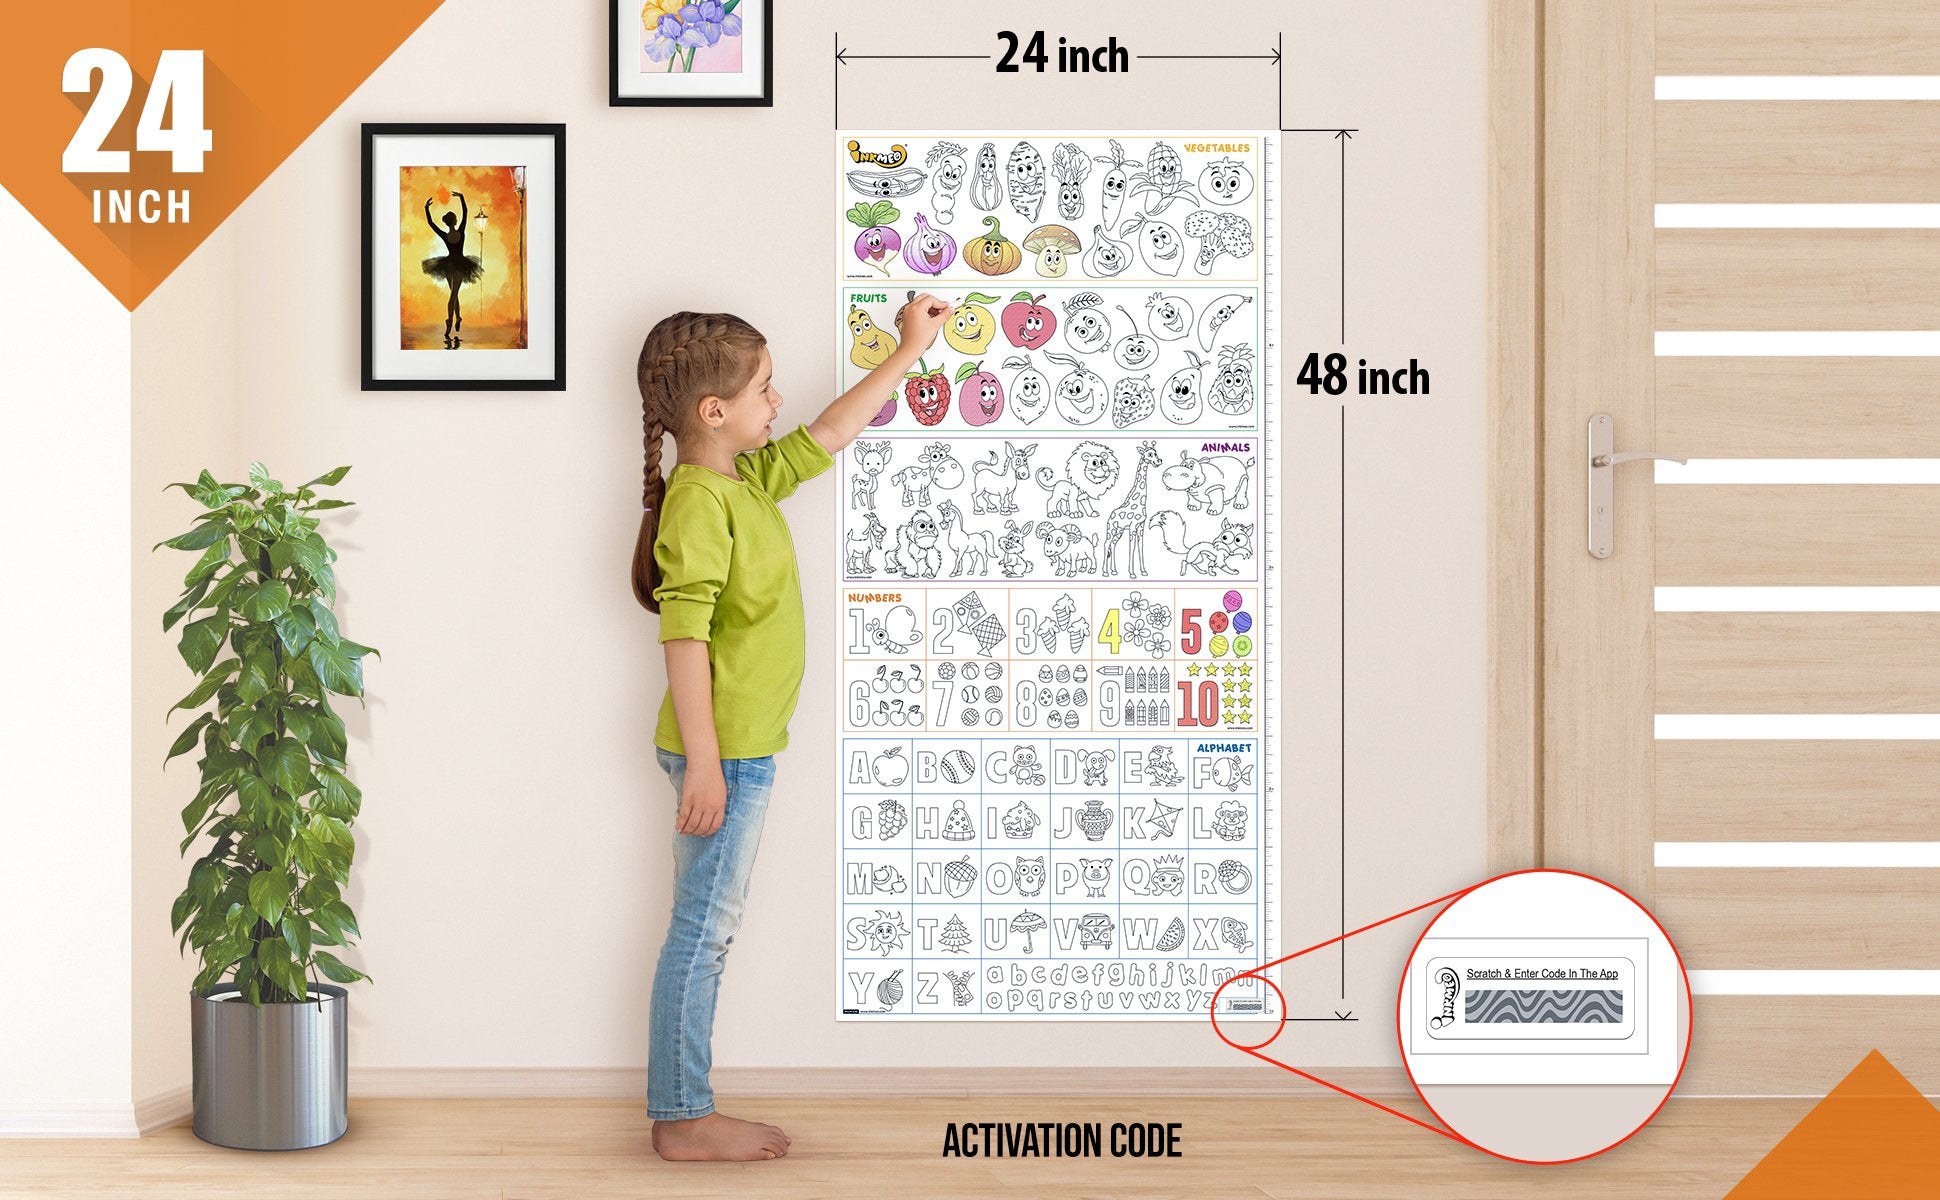  The image shows a home background with child colouring on roll sticked to the wall with size mentioned as 24*48 inches